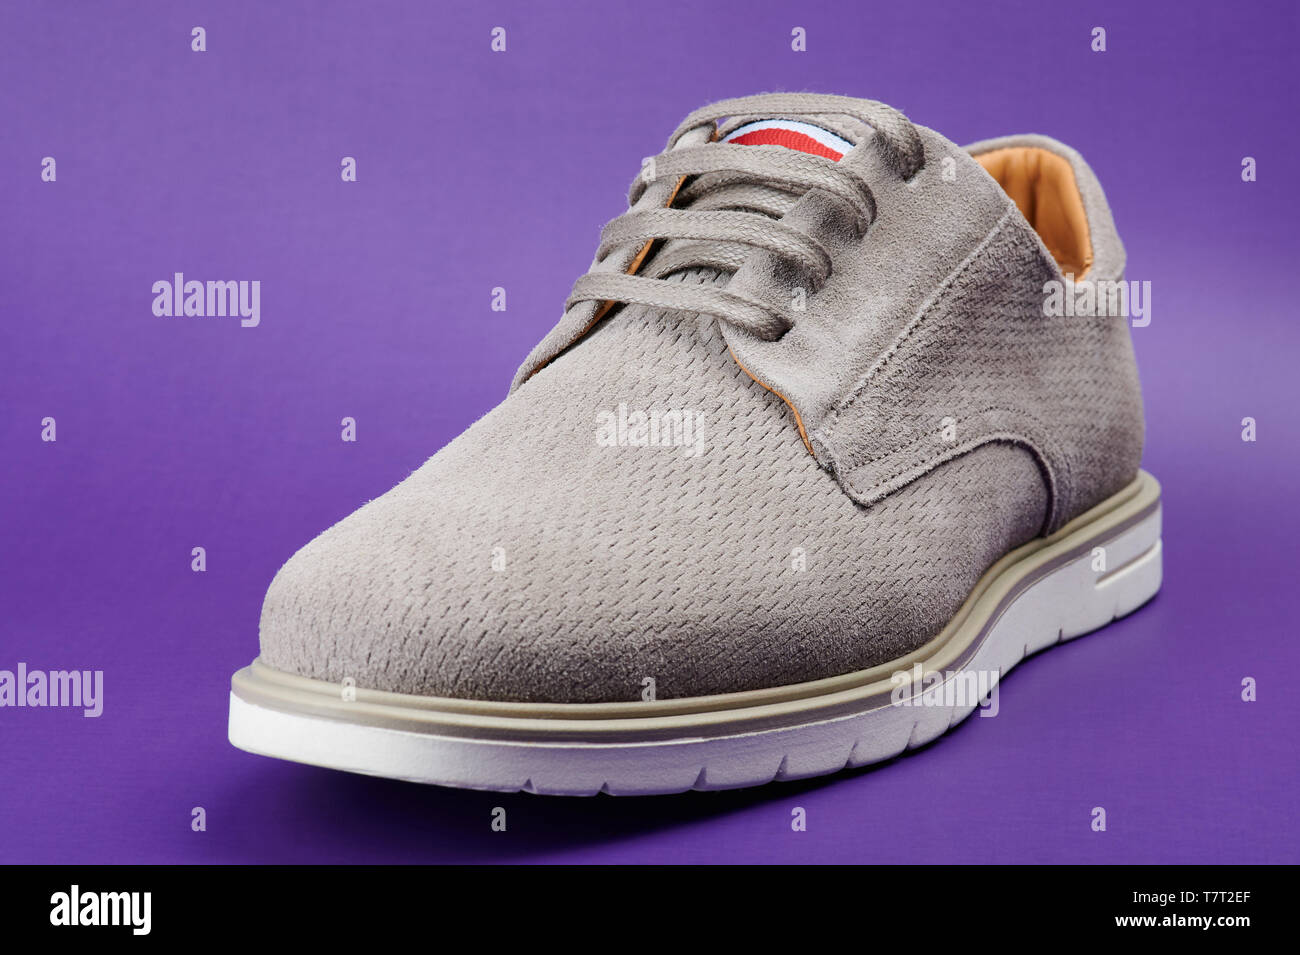 Closeup of gray man shoe isolated on purple background Stock Photo